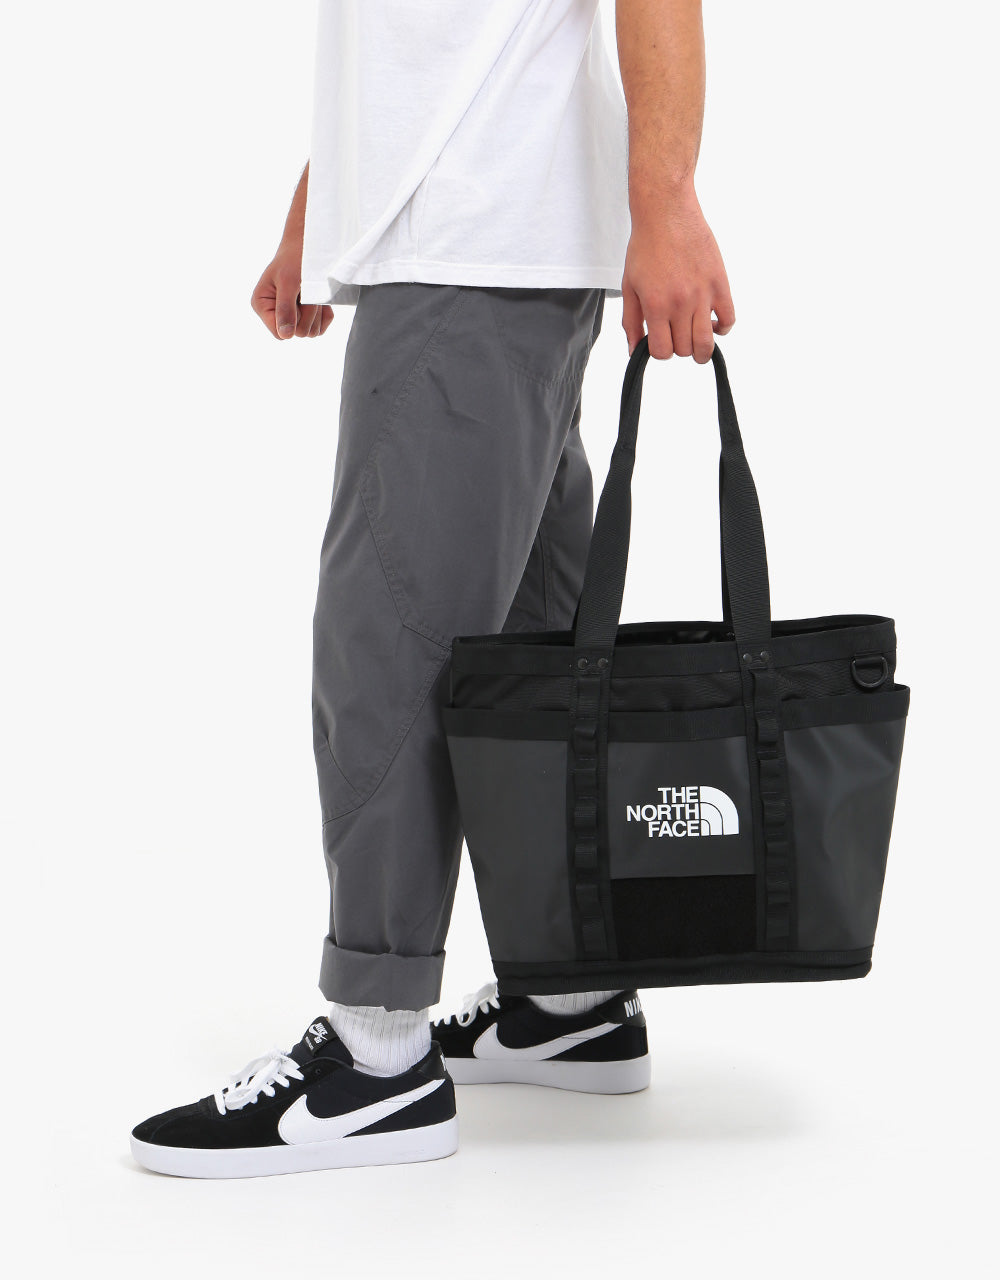 north face utility bag